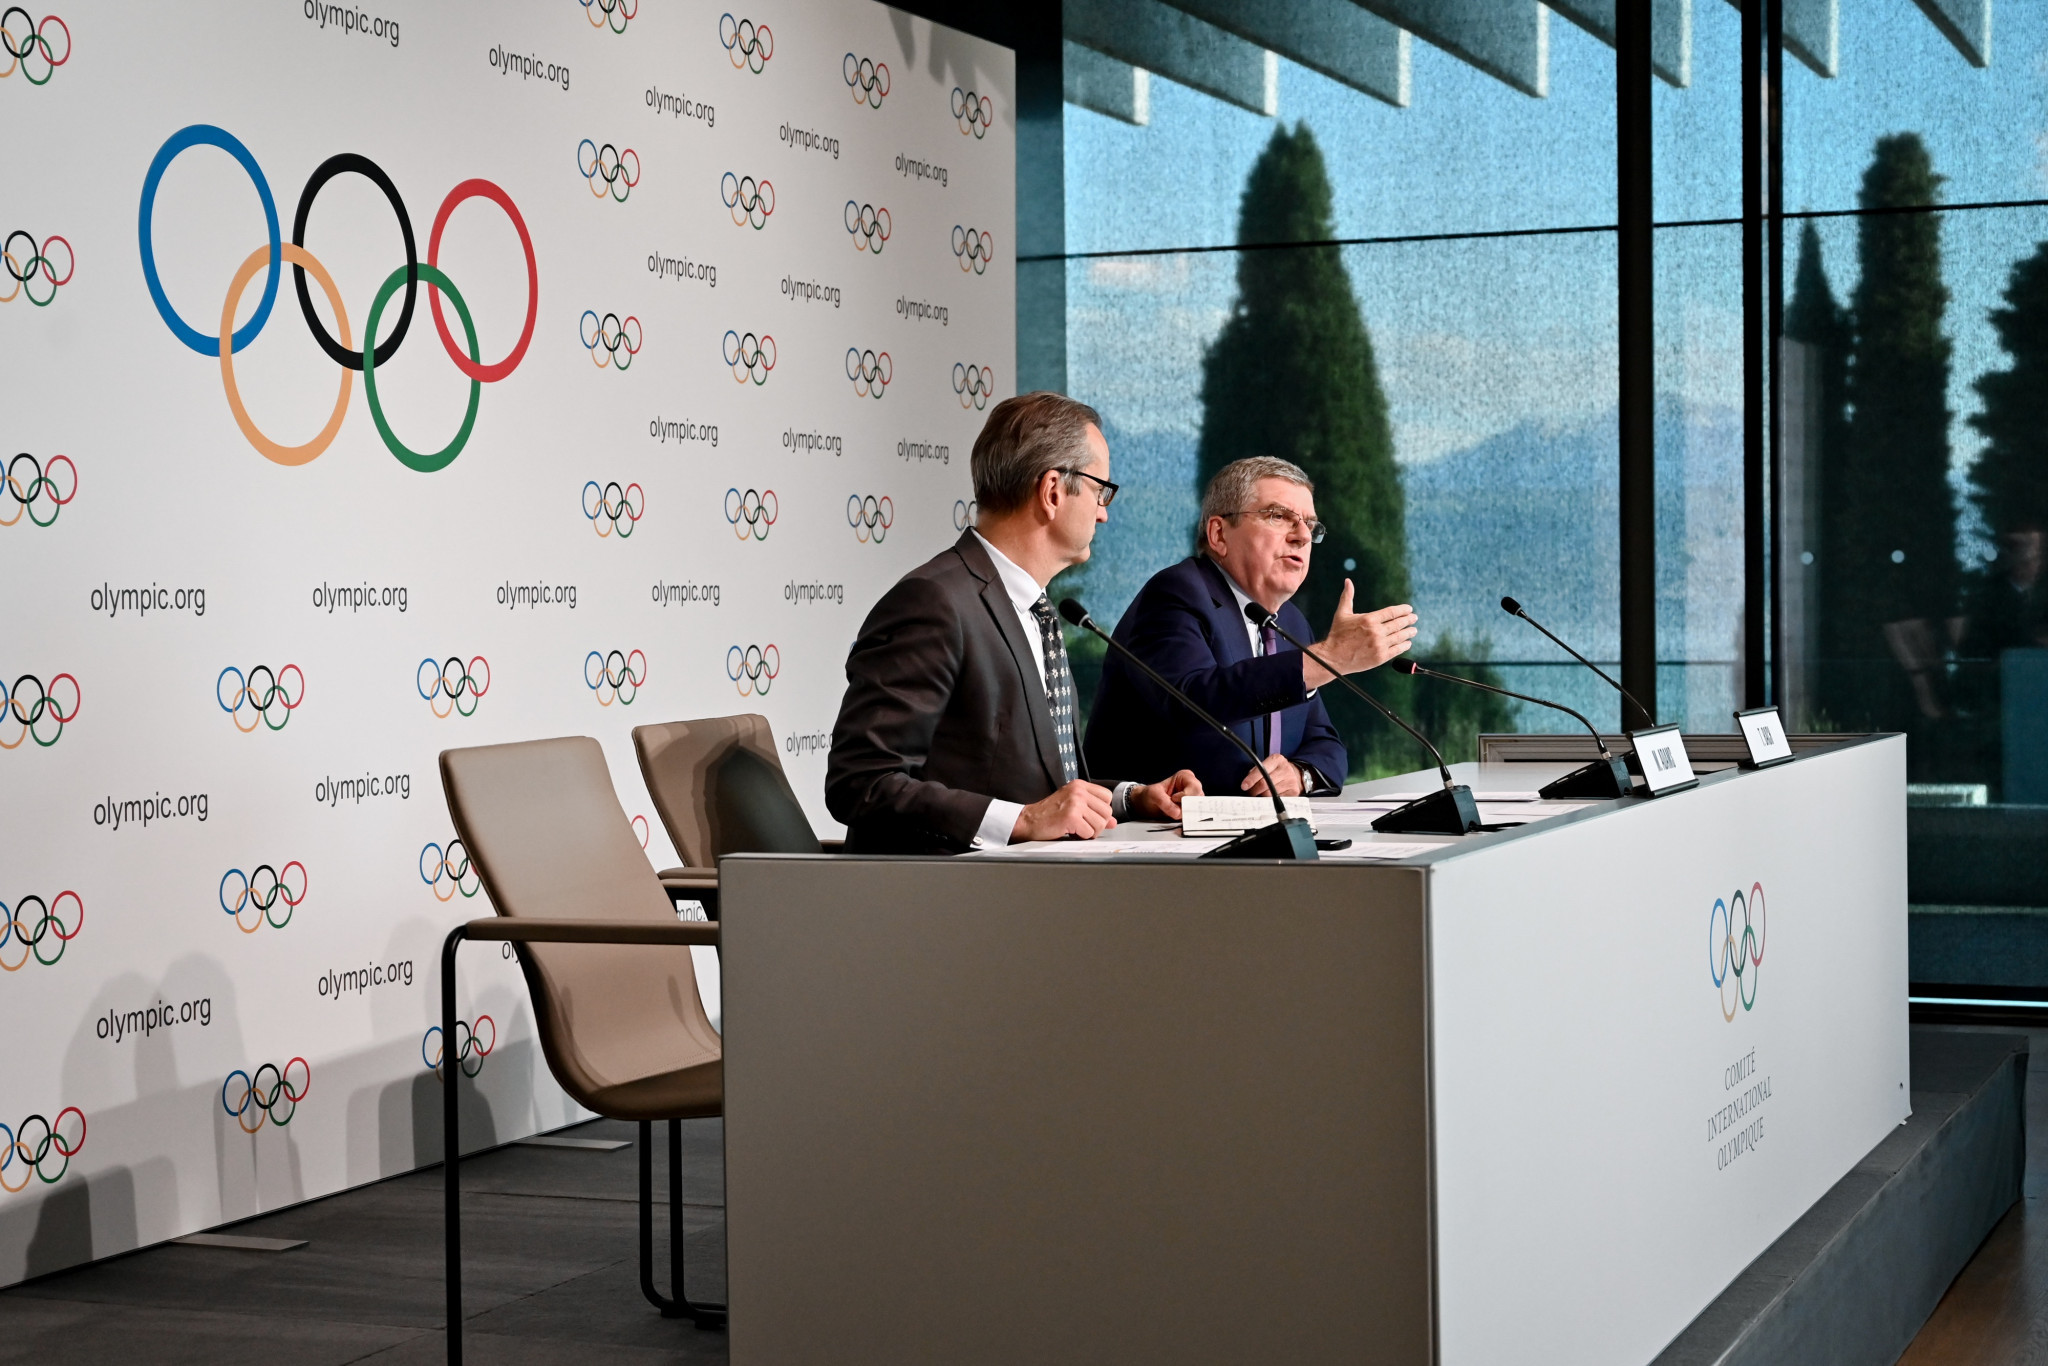 IOC President Thomas Bach reiterated his belief that the organisation should take a more targeted approach to the candidature process to avoid 